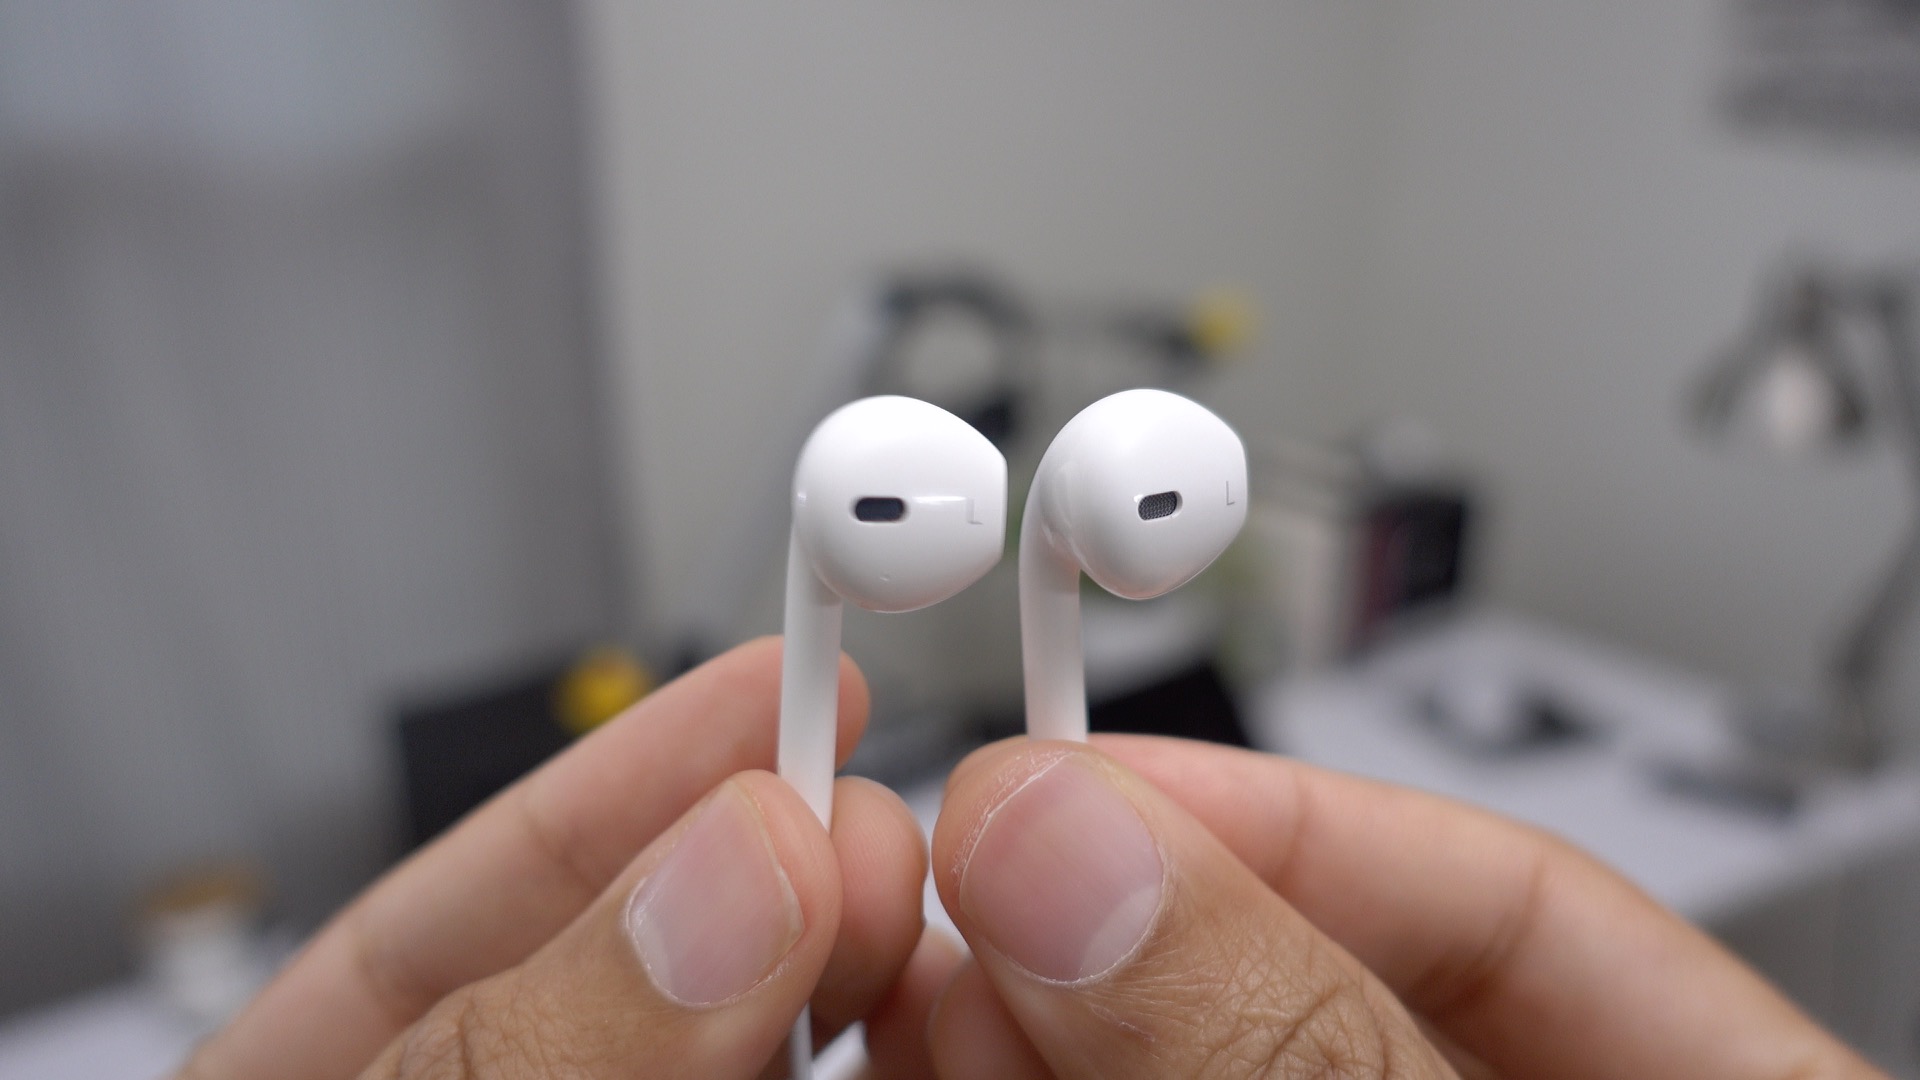 Apple's new $19 USB-C EarPods apparently support lossless audio